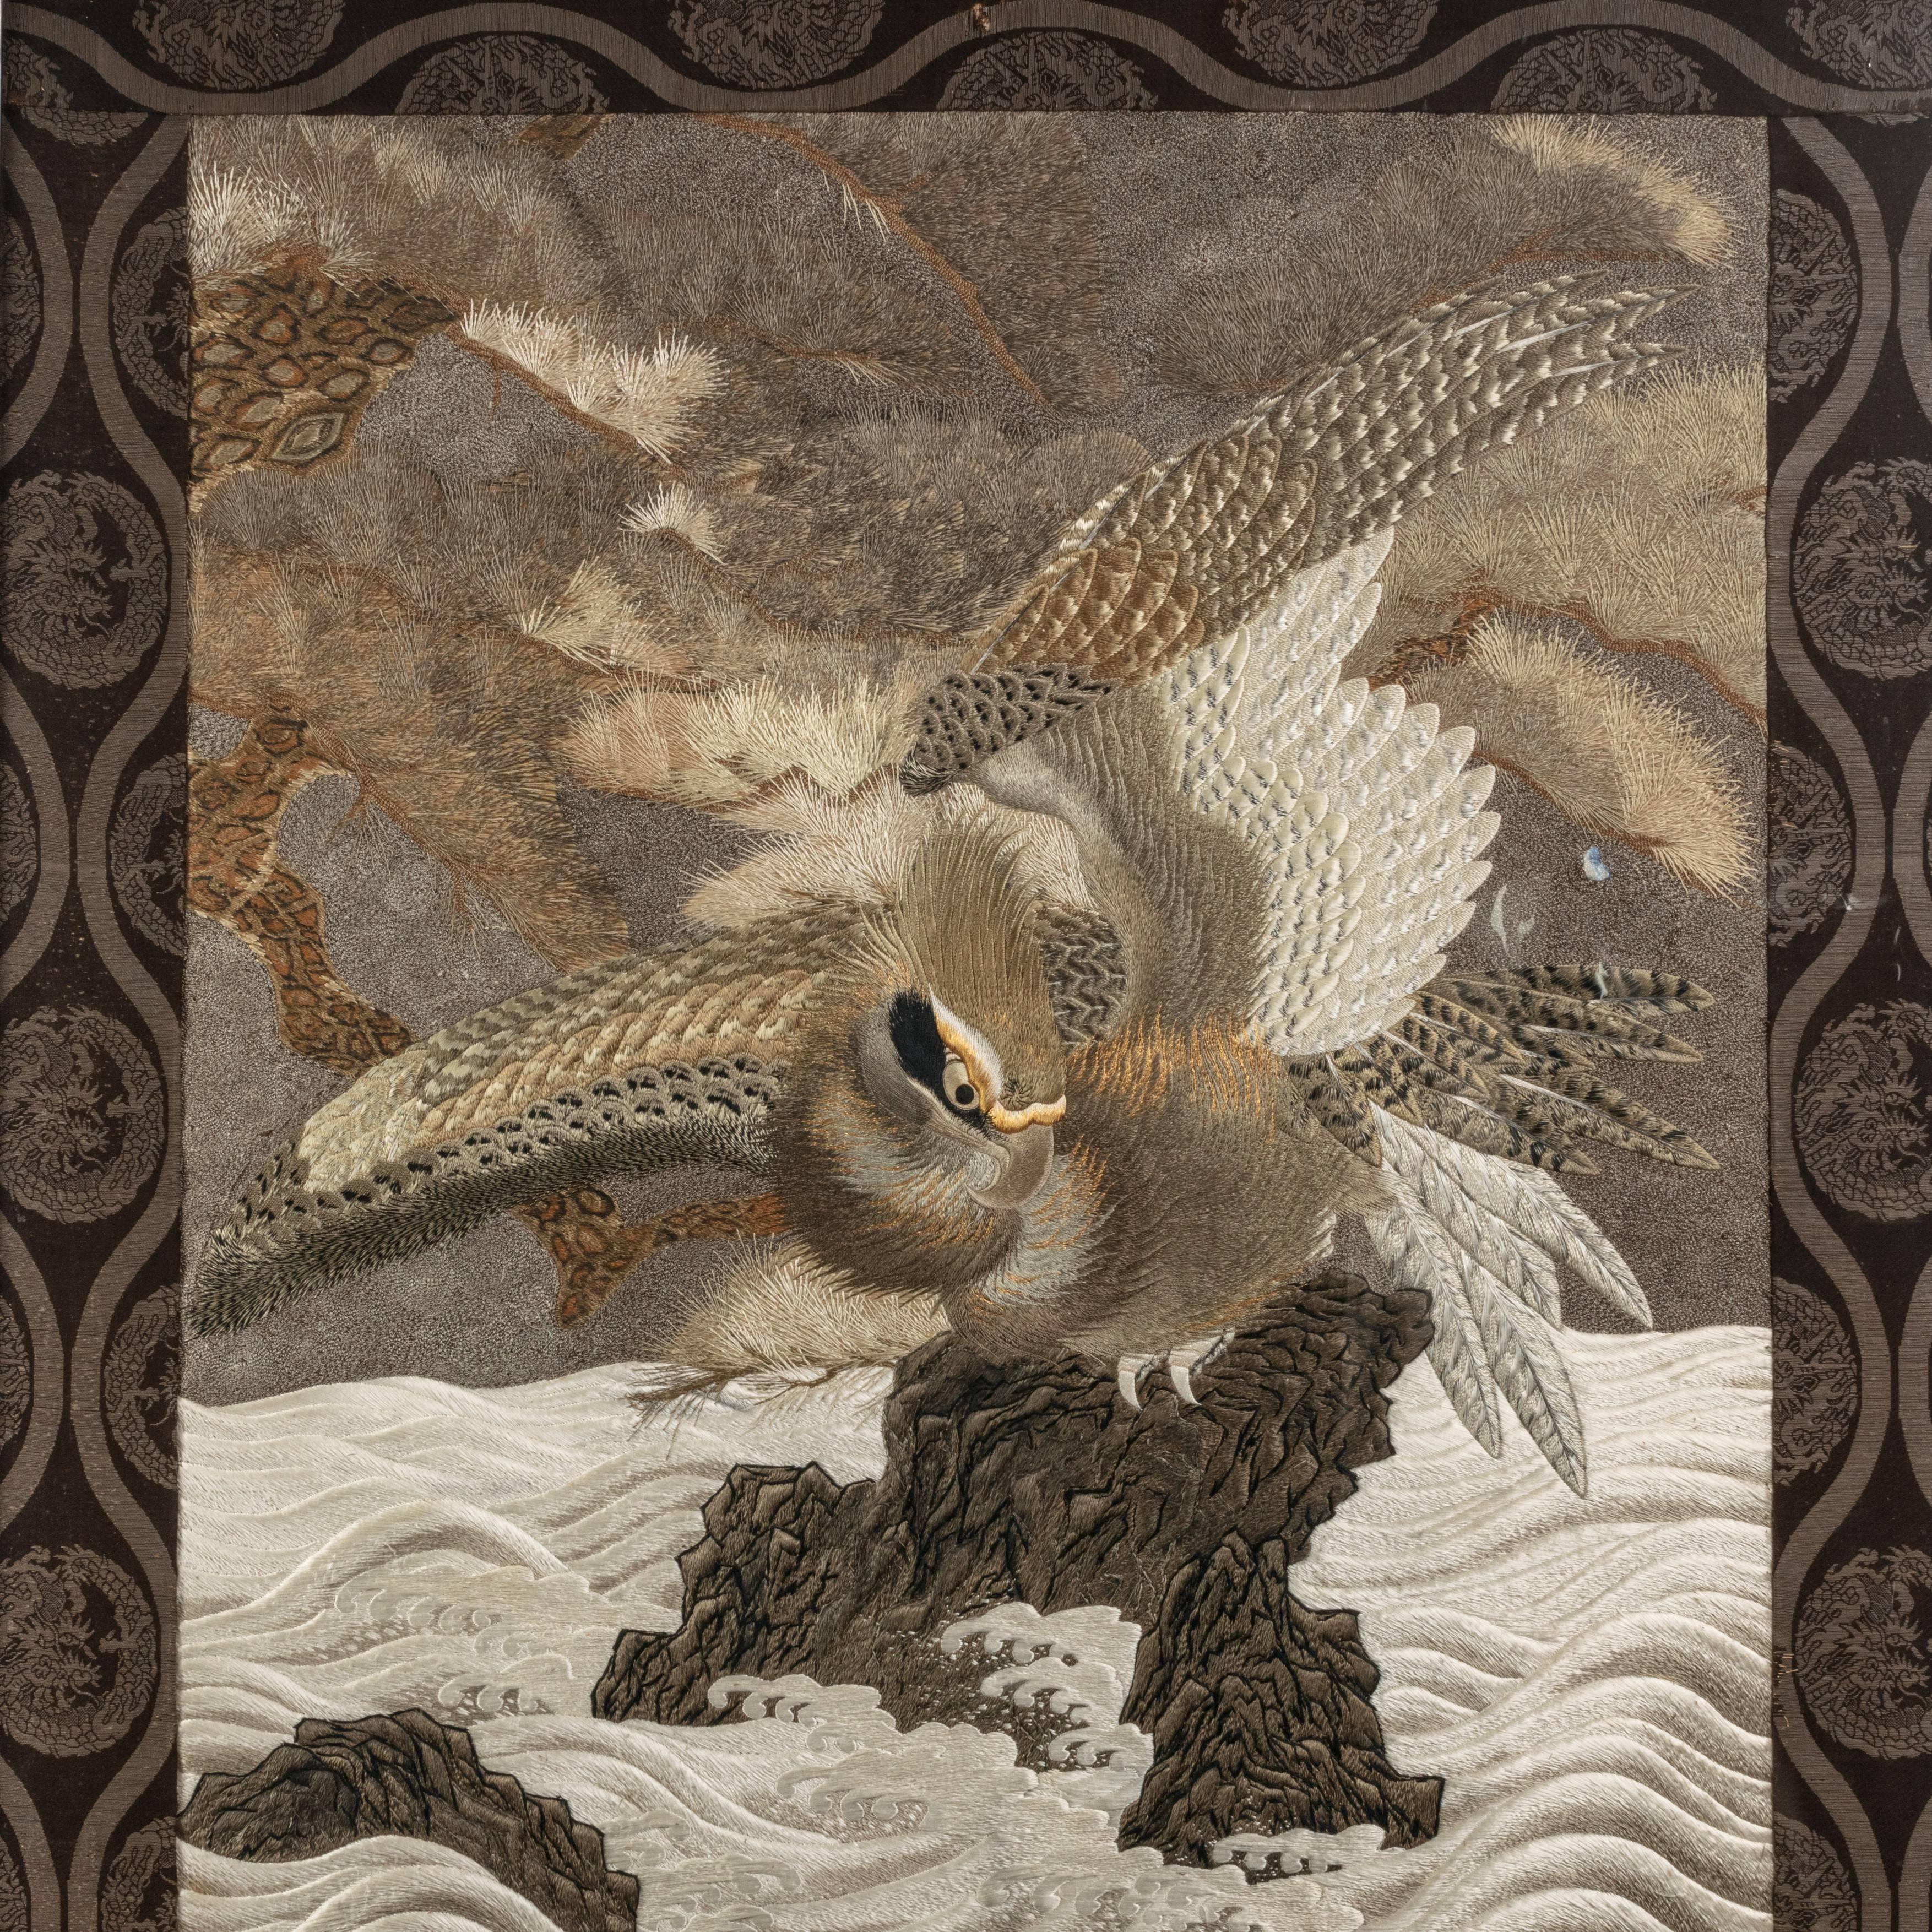 A large Meiji period silk embroidery of a sea eagle,
worked in a cream, brown and black palette with gold thread highlights, showing a sea eagle perched on a rocky outcrop scanning the frothing waves beneath him for fish, within a black brocade